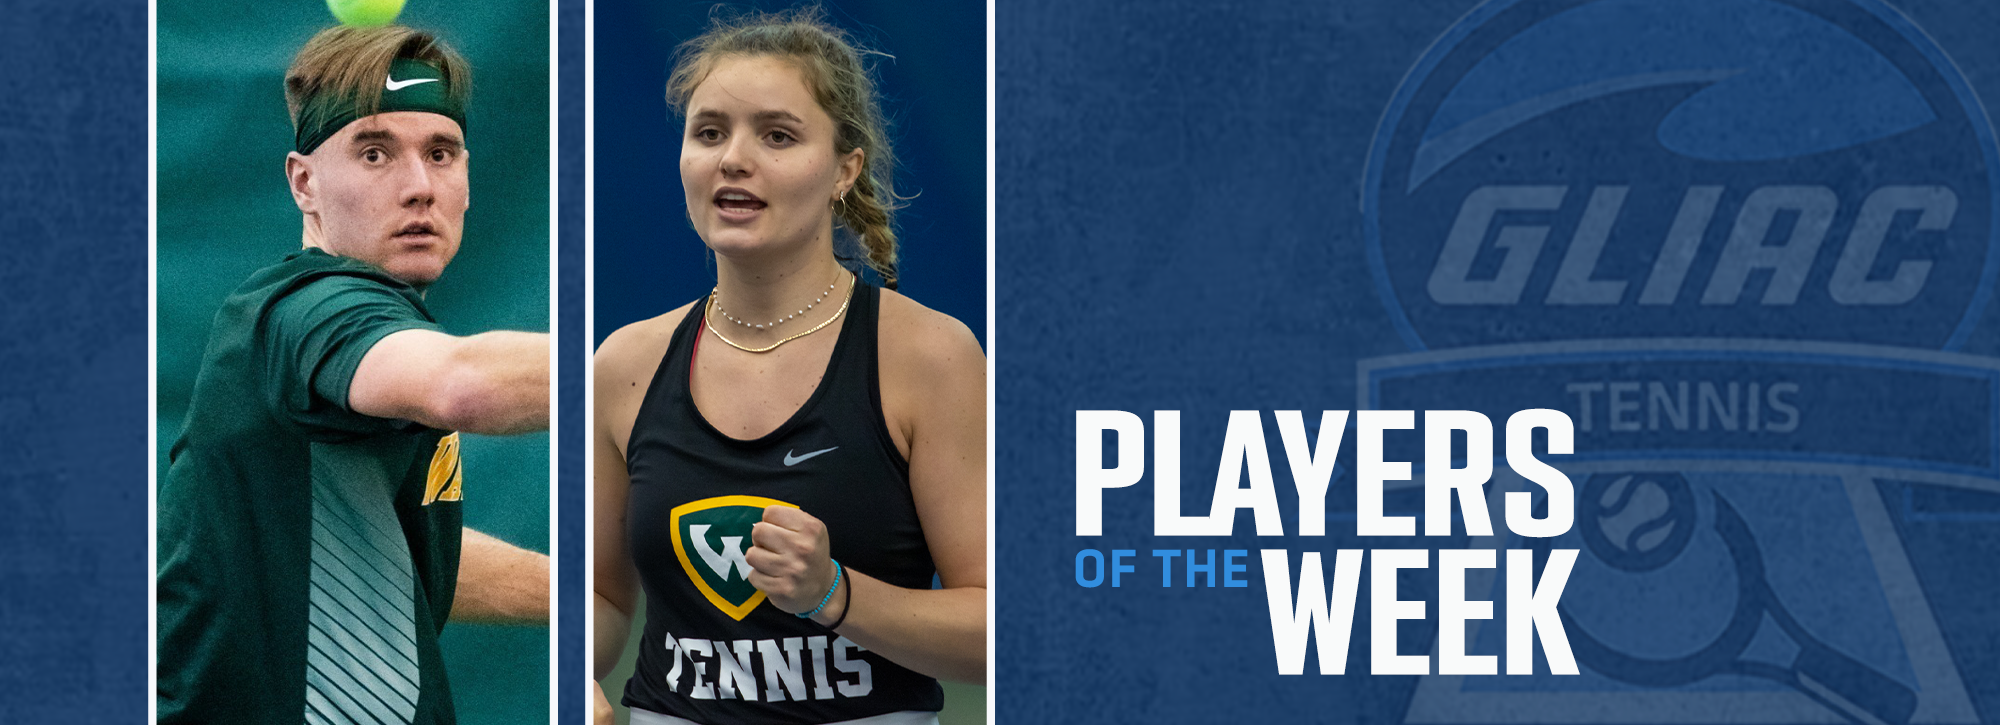 WSU's Grey and Ruyssen recognized with GLIAC Tennis Players of the Week honors